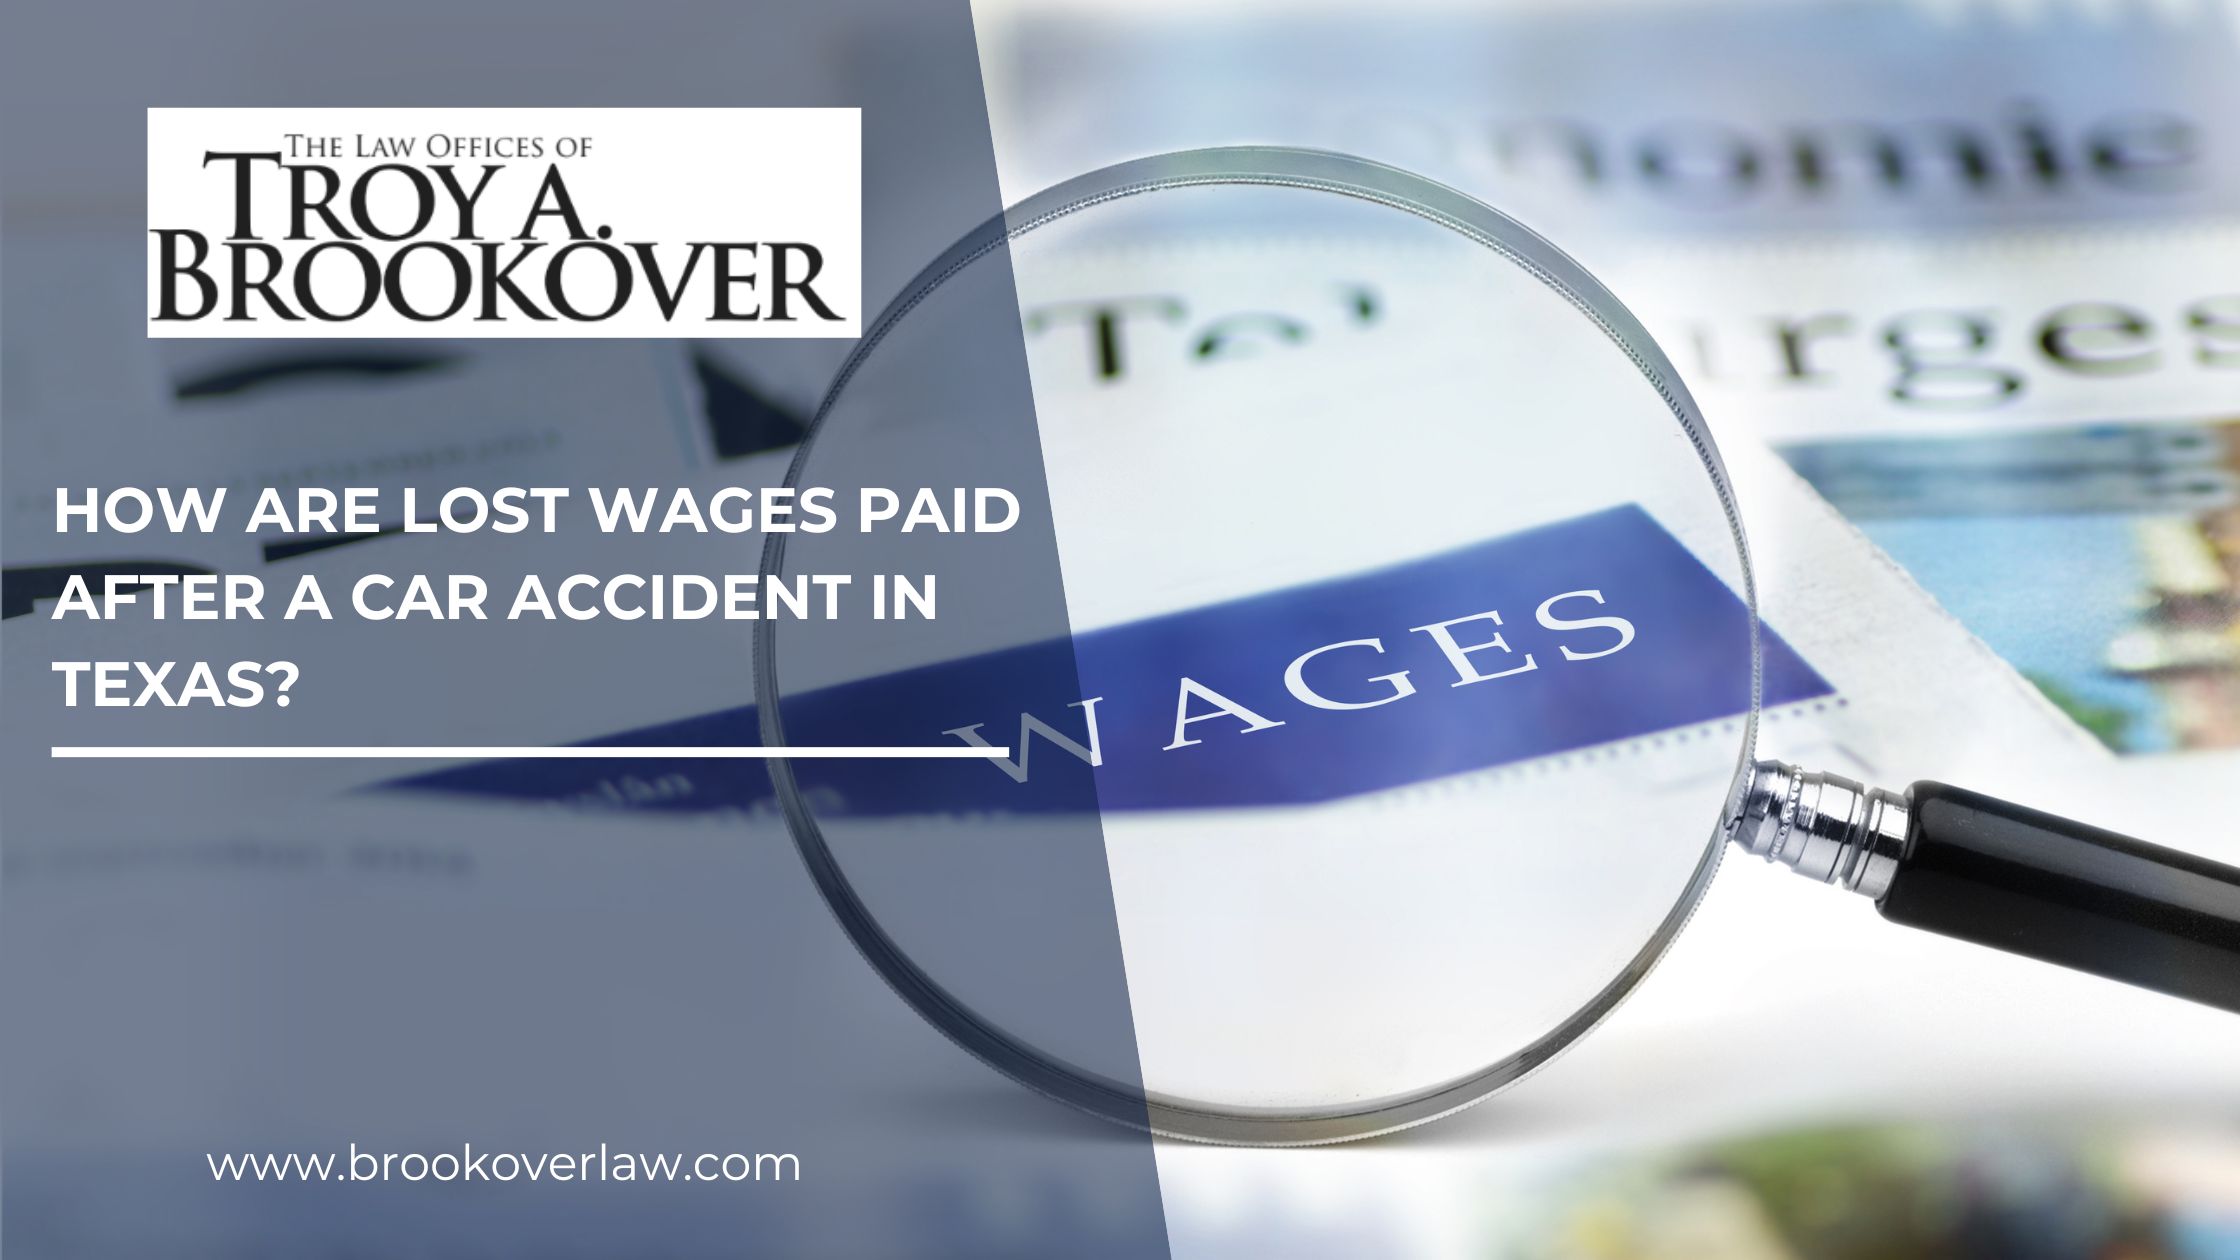 Promotional image from The Law Offices of Troy A. Brookover, focusing on a magnifying glass over the term 'WAGES' with the heading 'How Are Lost Wages Paid After a Car Accident in Texas?' indicating legal assistance for recovering lost income.